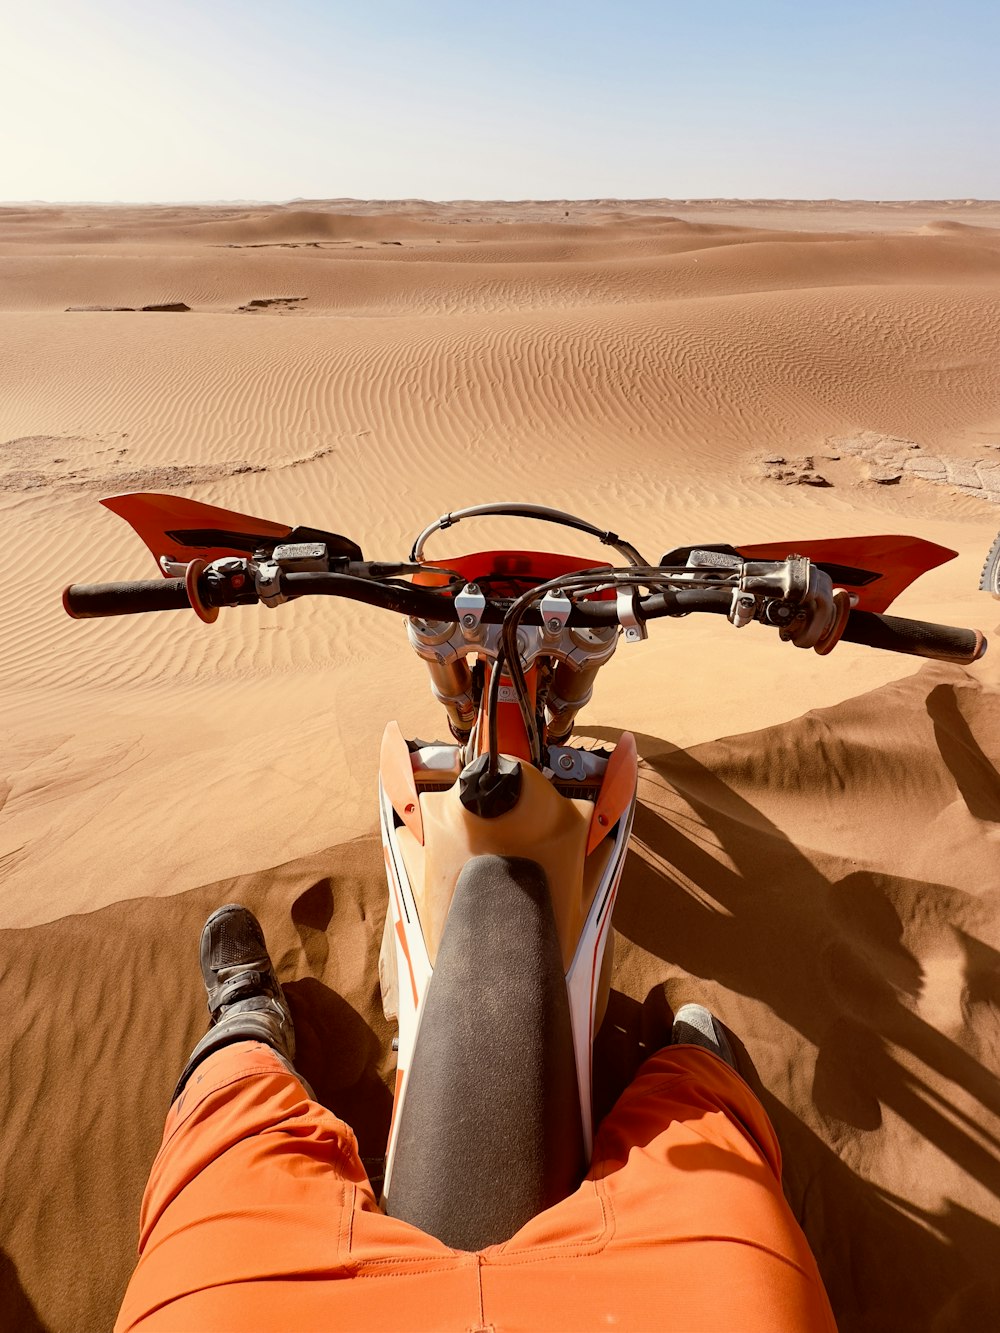 a person riding a motorcycle in the desert